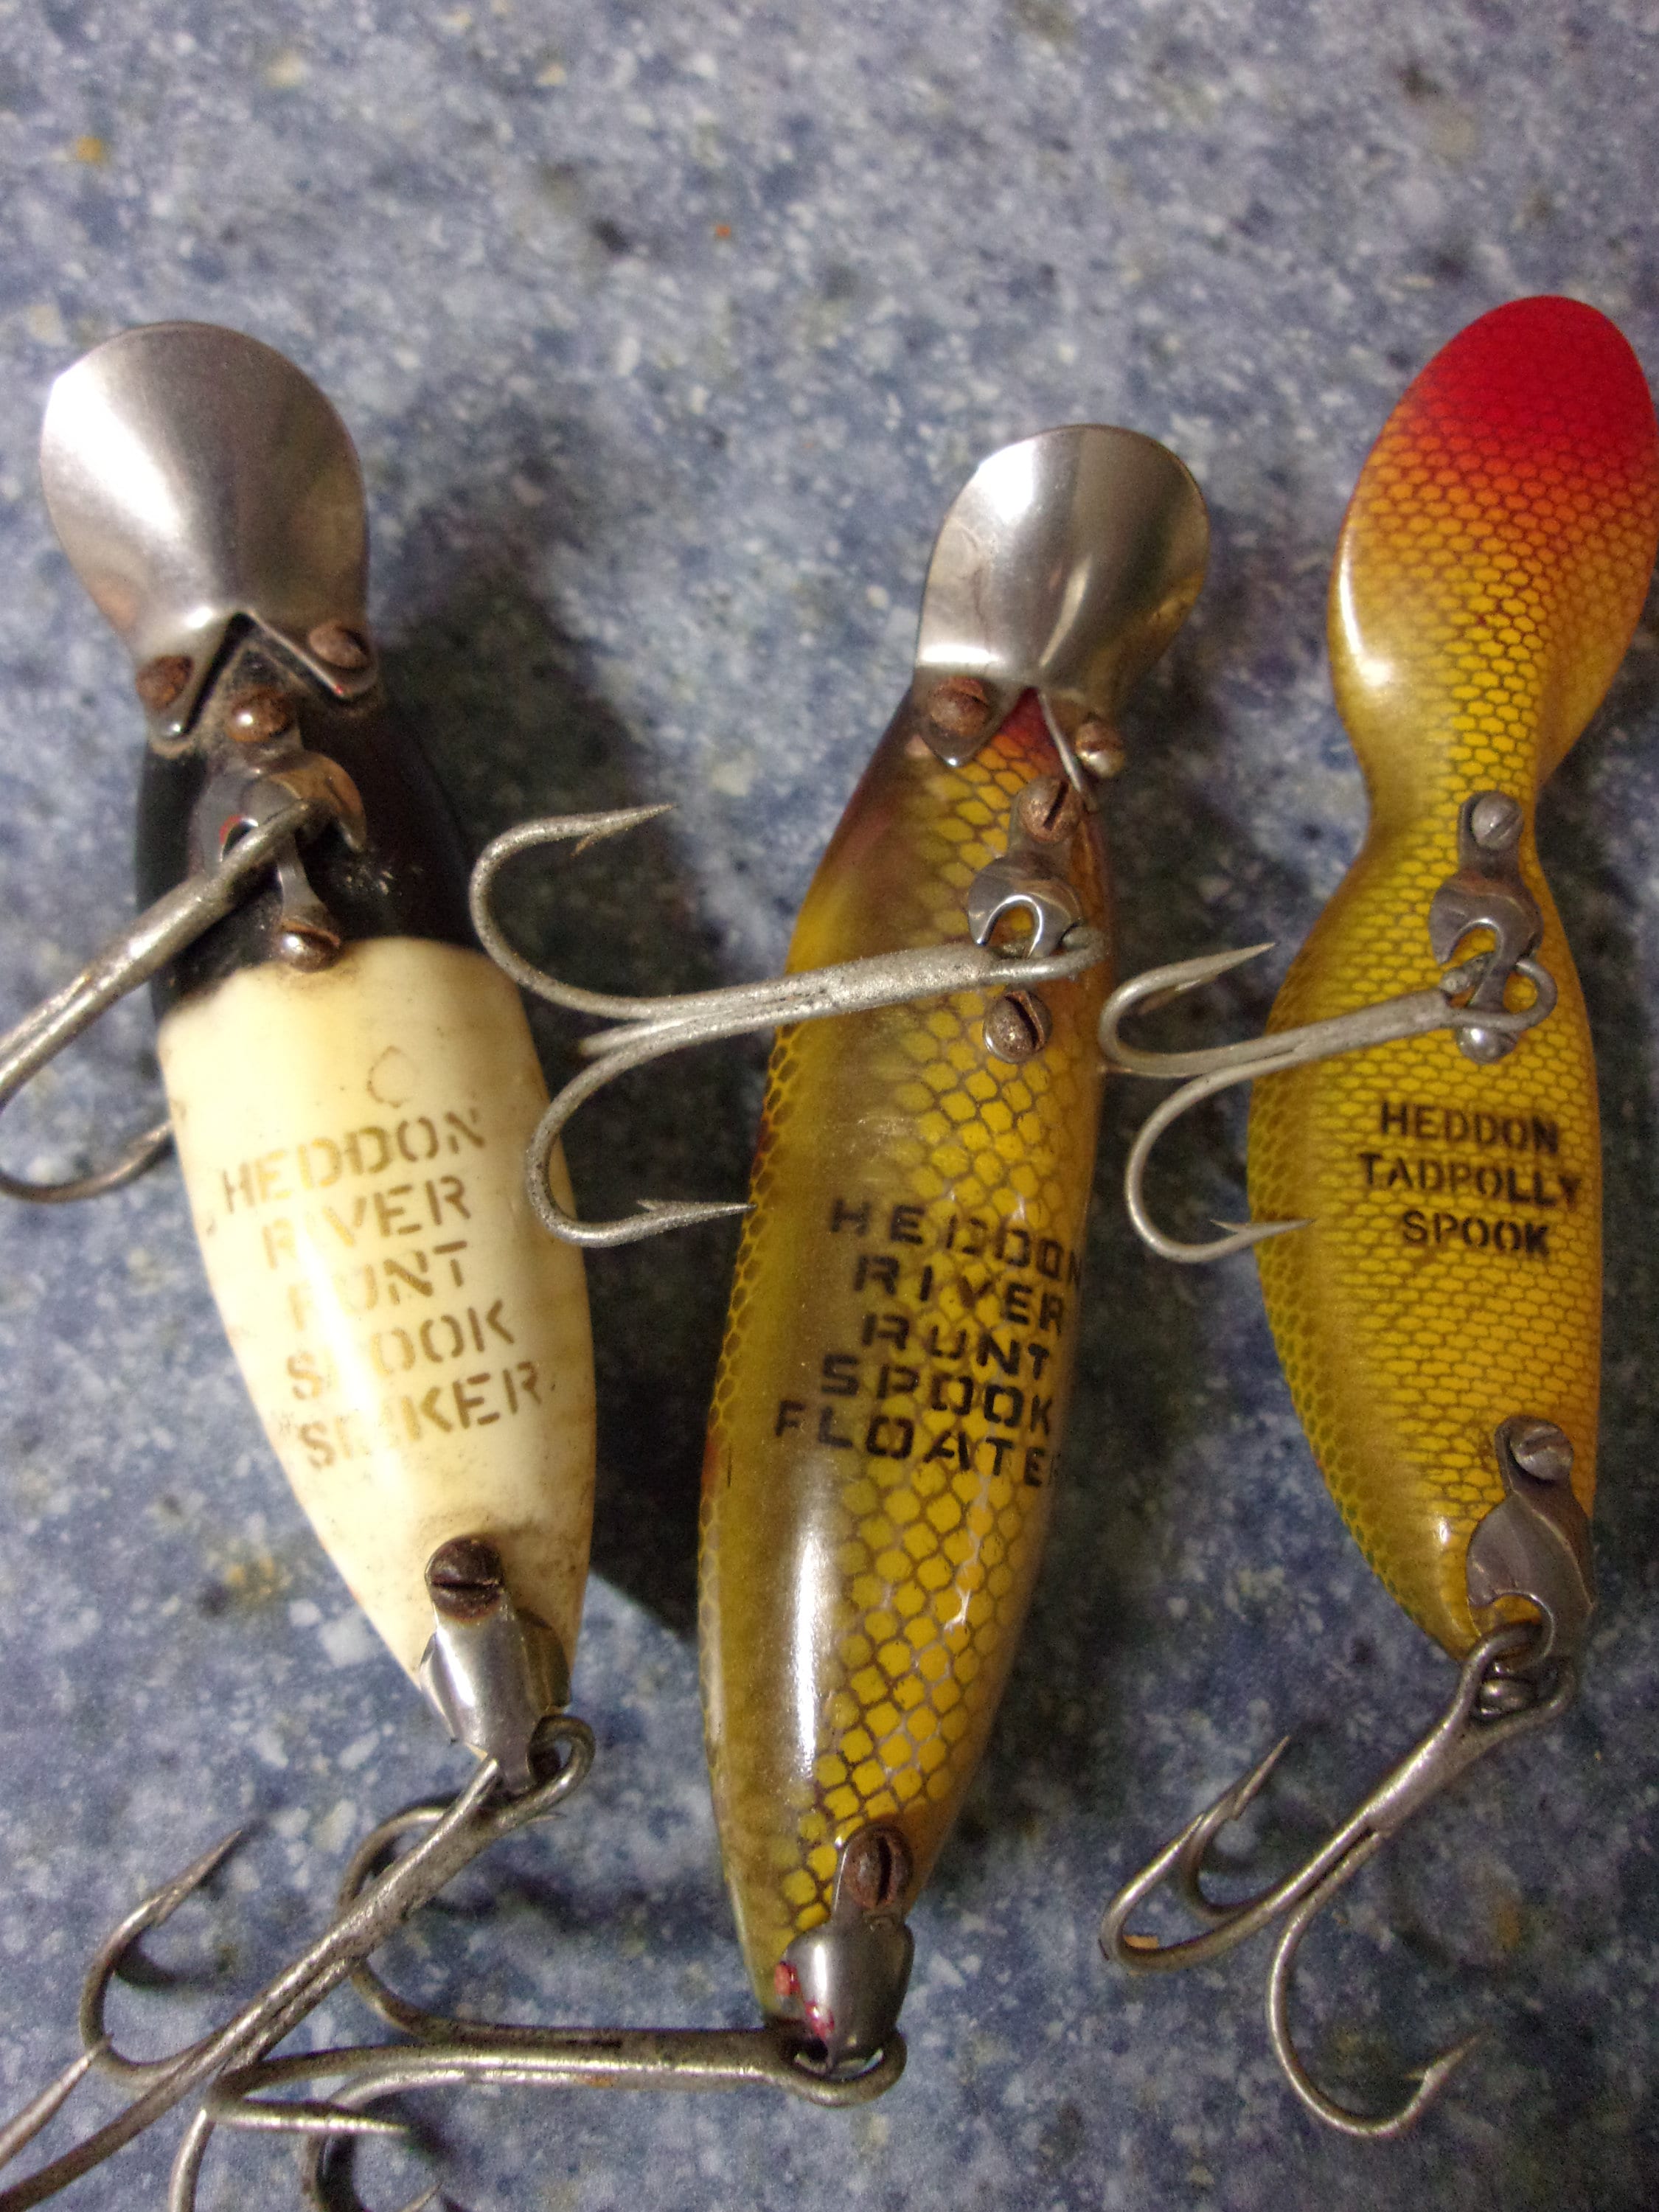 Vintage Fishing Lures,heddon,millsite,lot of 5,pecky Cyprus Wood Stand,rare  Wood,fishing Lure Collection,fishing Gift,cabin Decor,lake -  Canada